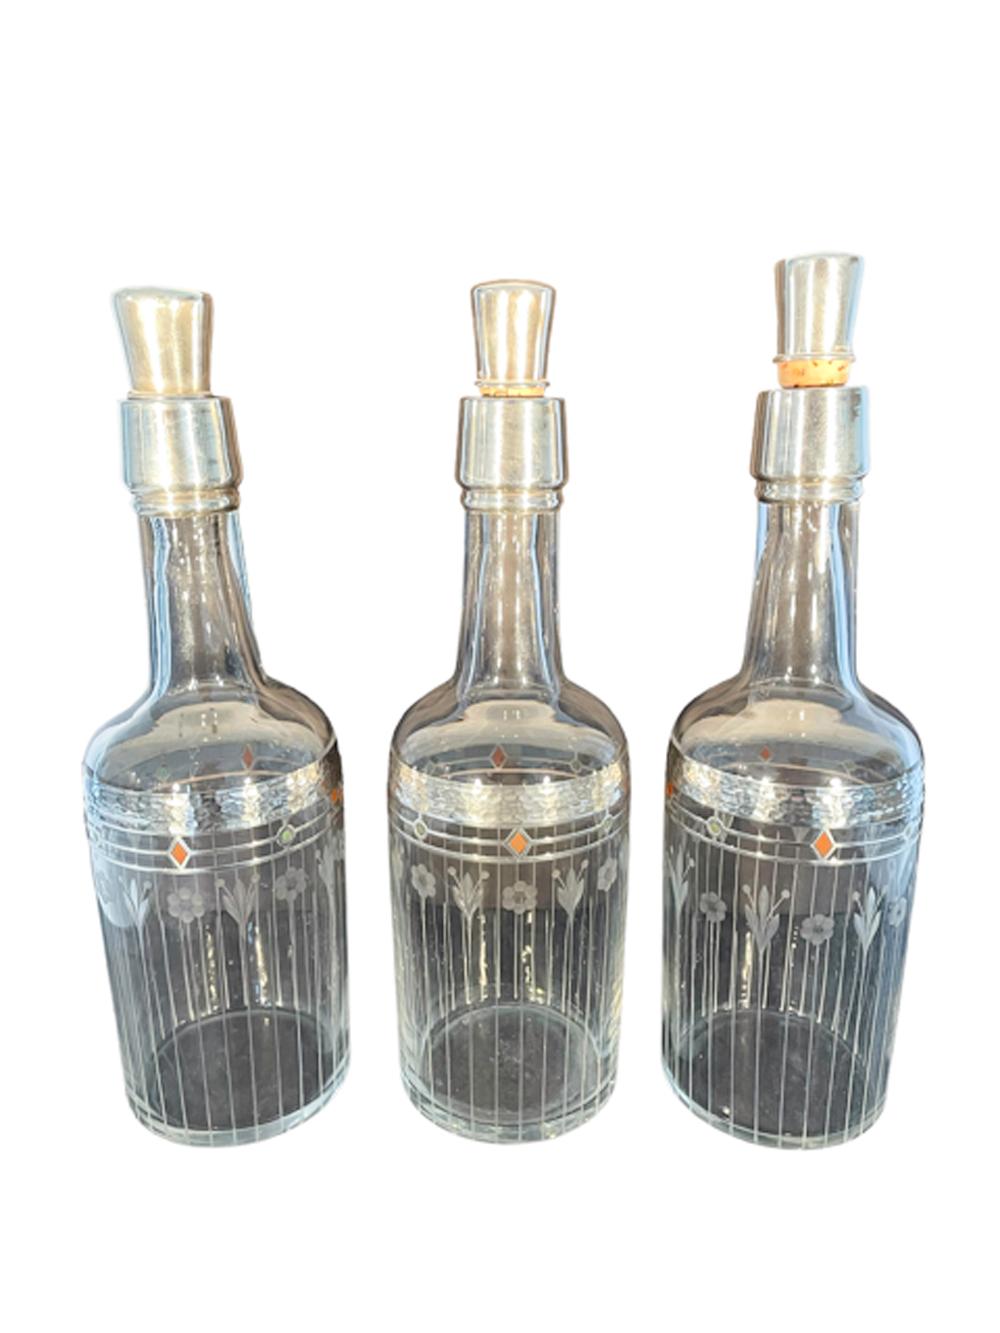 Rare set of three matched Art Deco back bar bottles or decanters of clear glass, in the manner of T.G. Hawkes & Co. Each with a silver covered cork stopper and silver overlay at the top of the neck and with a band of hand hammered silver at the